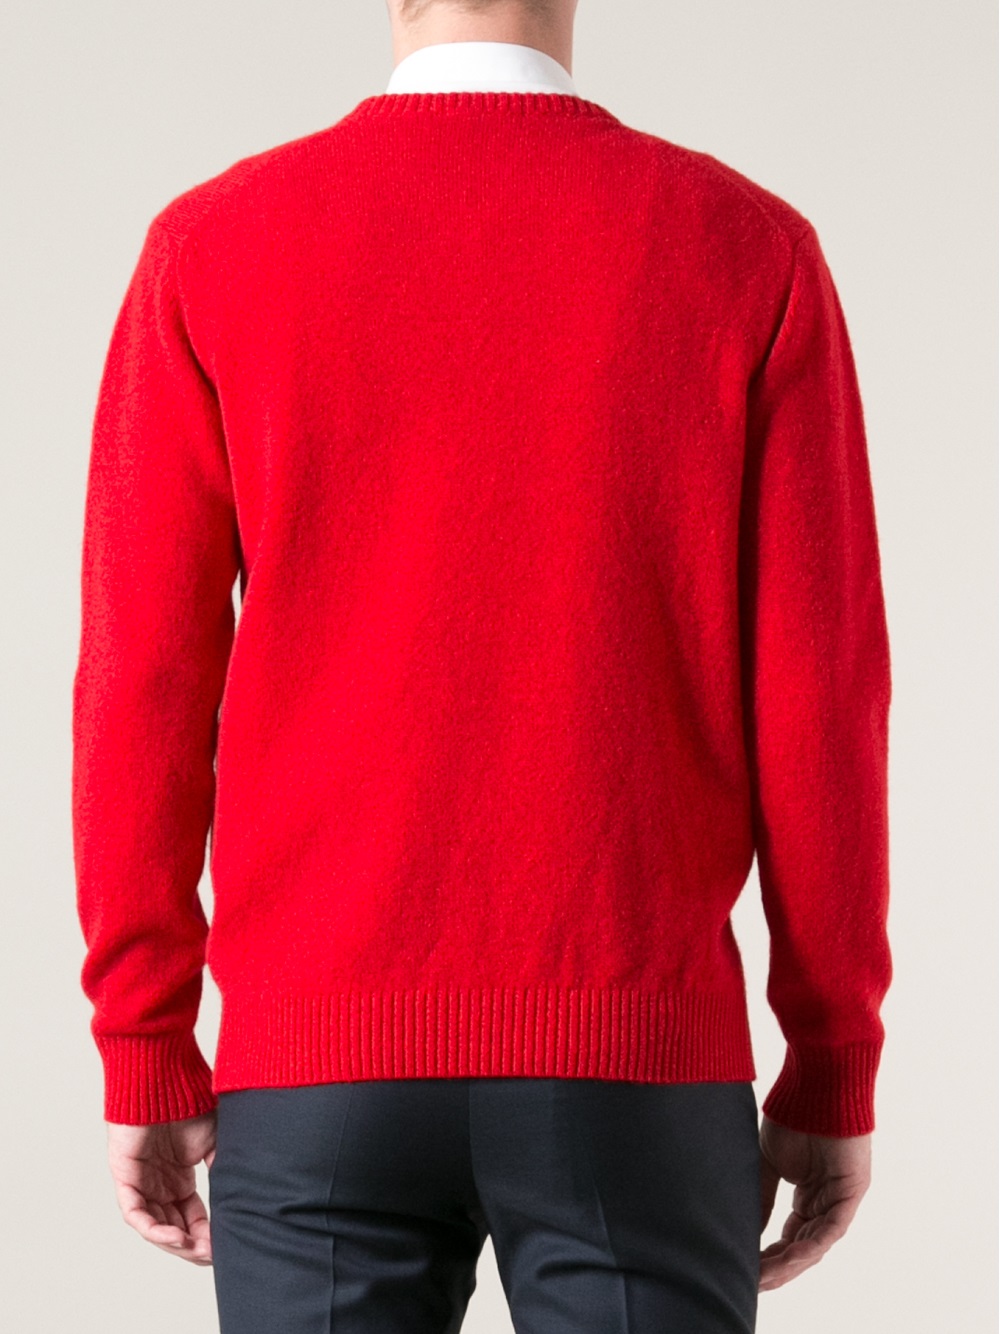 Lyst - Ami Crew Neck Sweater in Red for Men